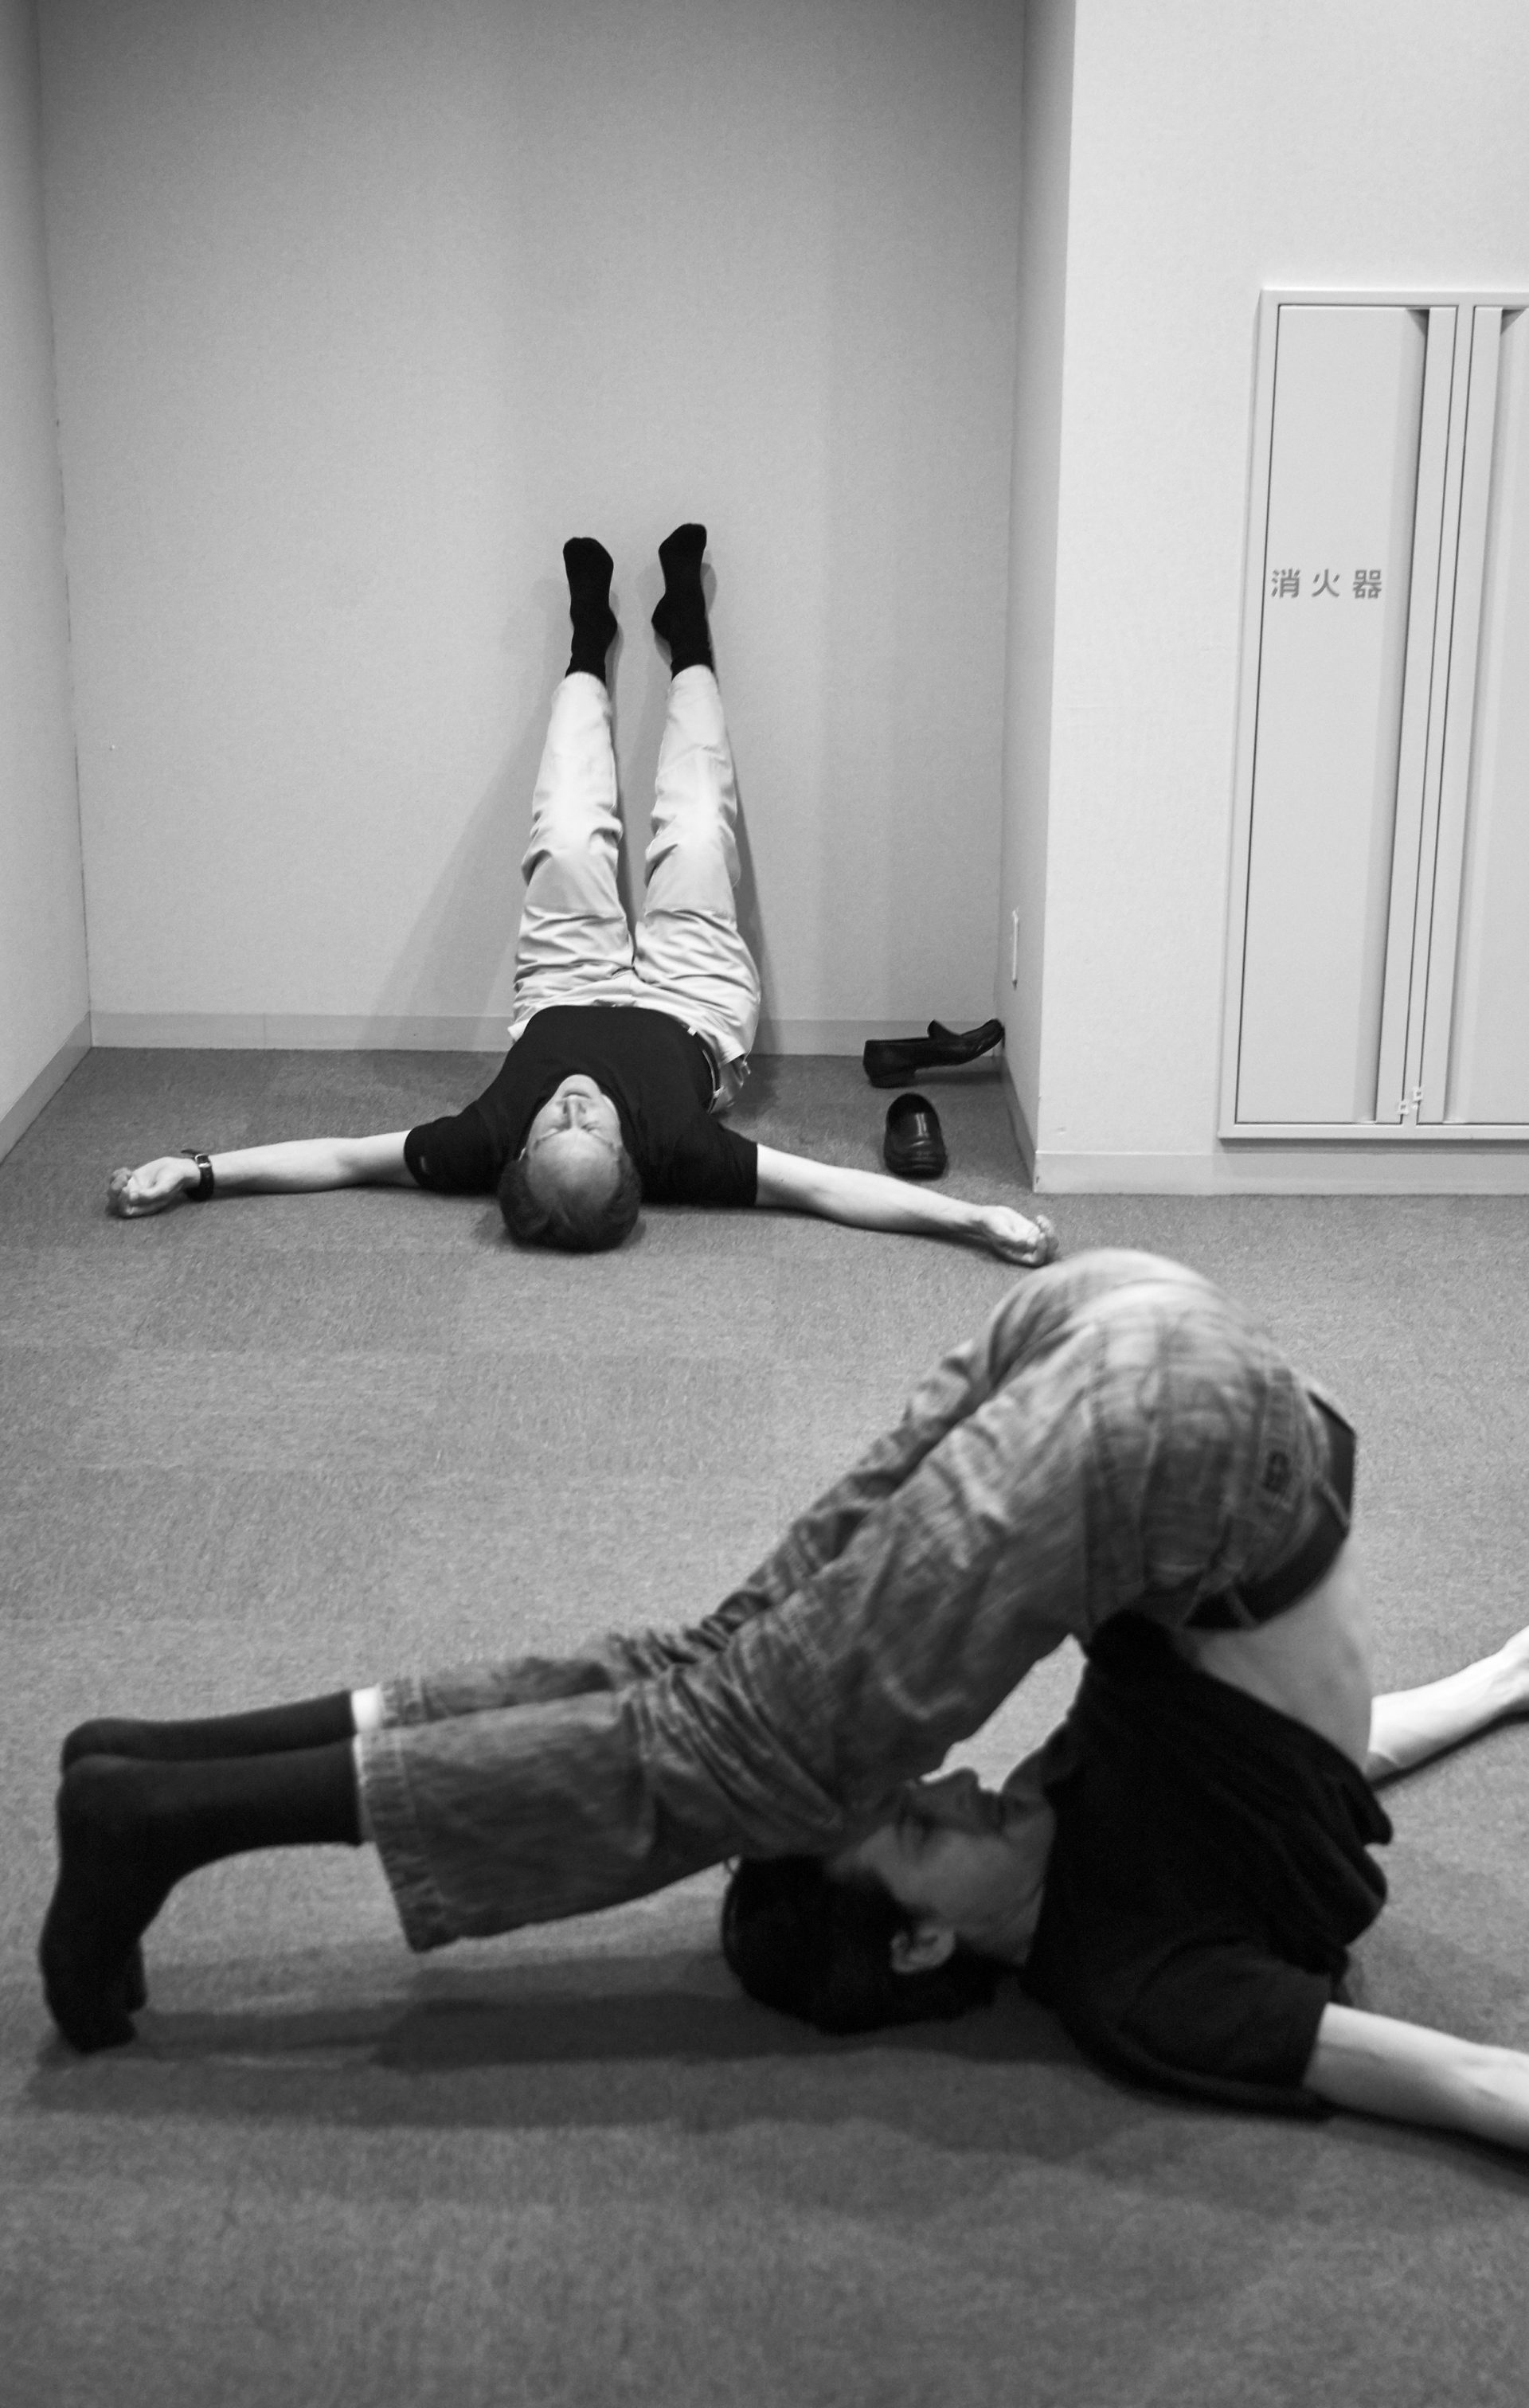  Two musians of The deutsche Kammerphilharmonie Bremen doing streching exercises on the floor before the concert in the Tokyo Opera City Concert Hall, Tokyo, Japan 16.7.2007, The deutsche Kammerphilharmonie Bremen on tour through Japan. (In Tune – Variations on an Orchestra)